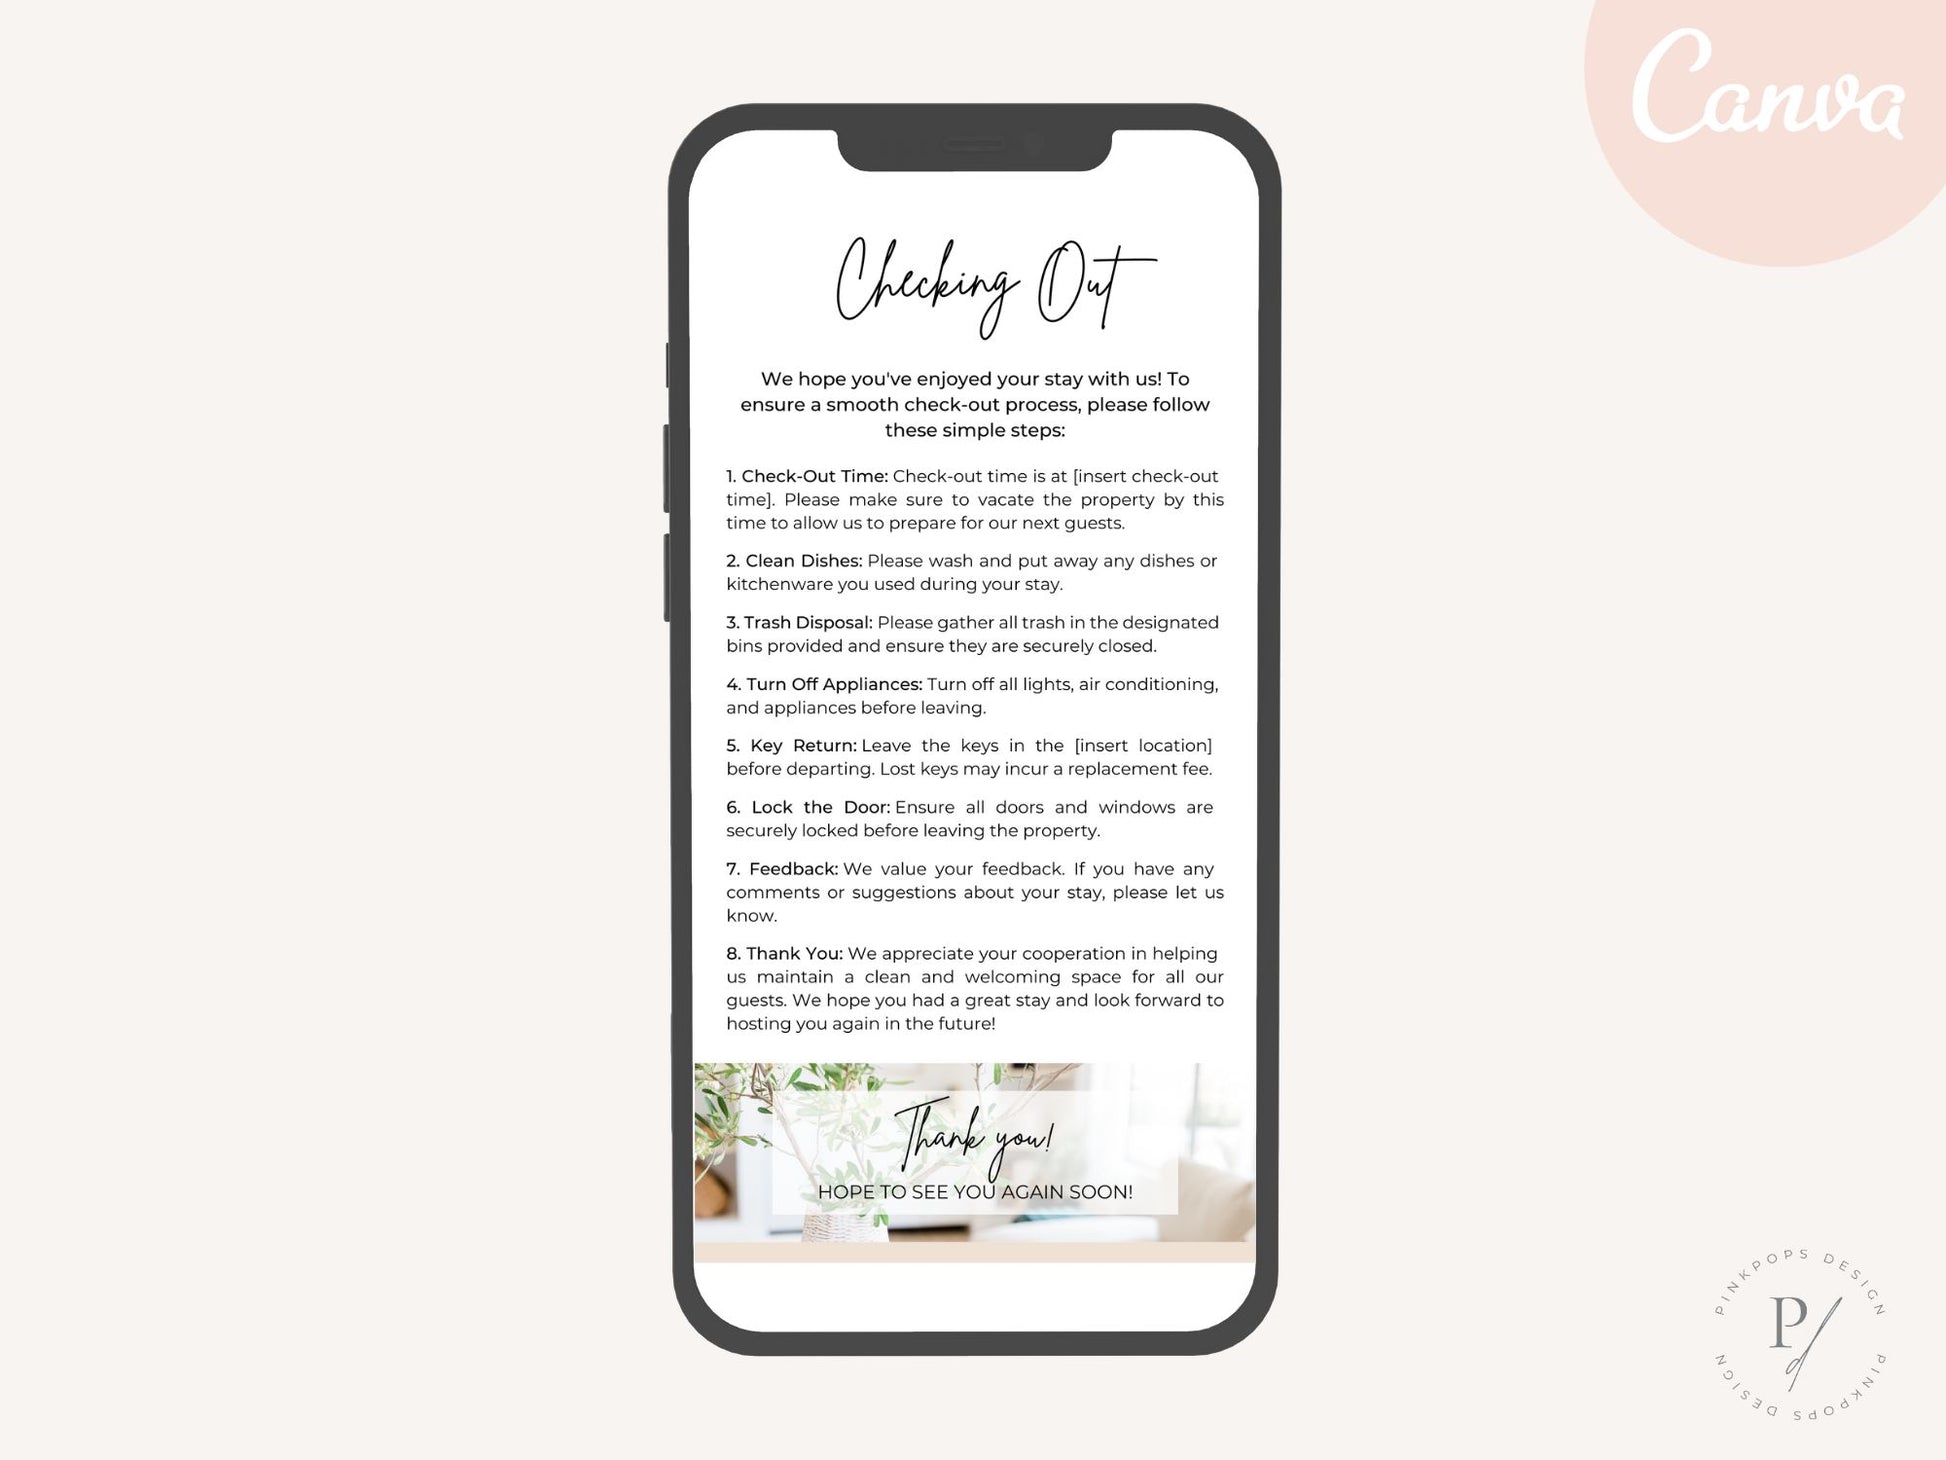 Textable Airbnb Checking Out Page - Editable and digital template for providing clear instructions for a hassle-free departure in your vacation rental.